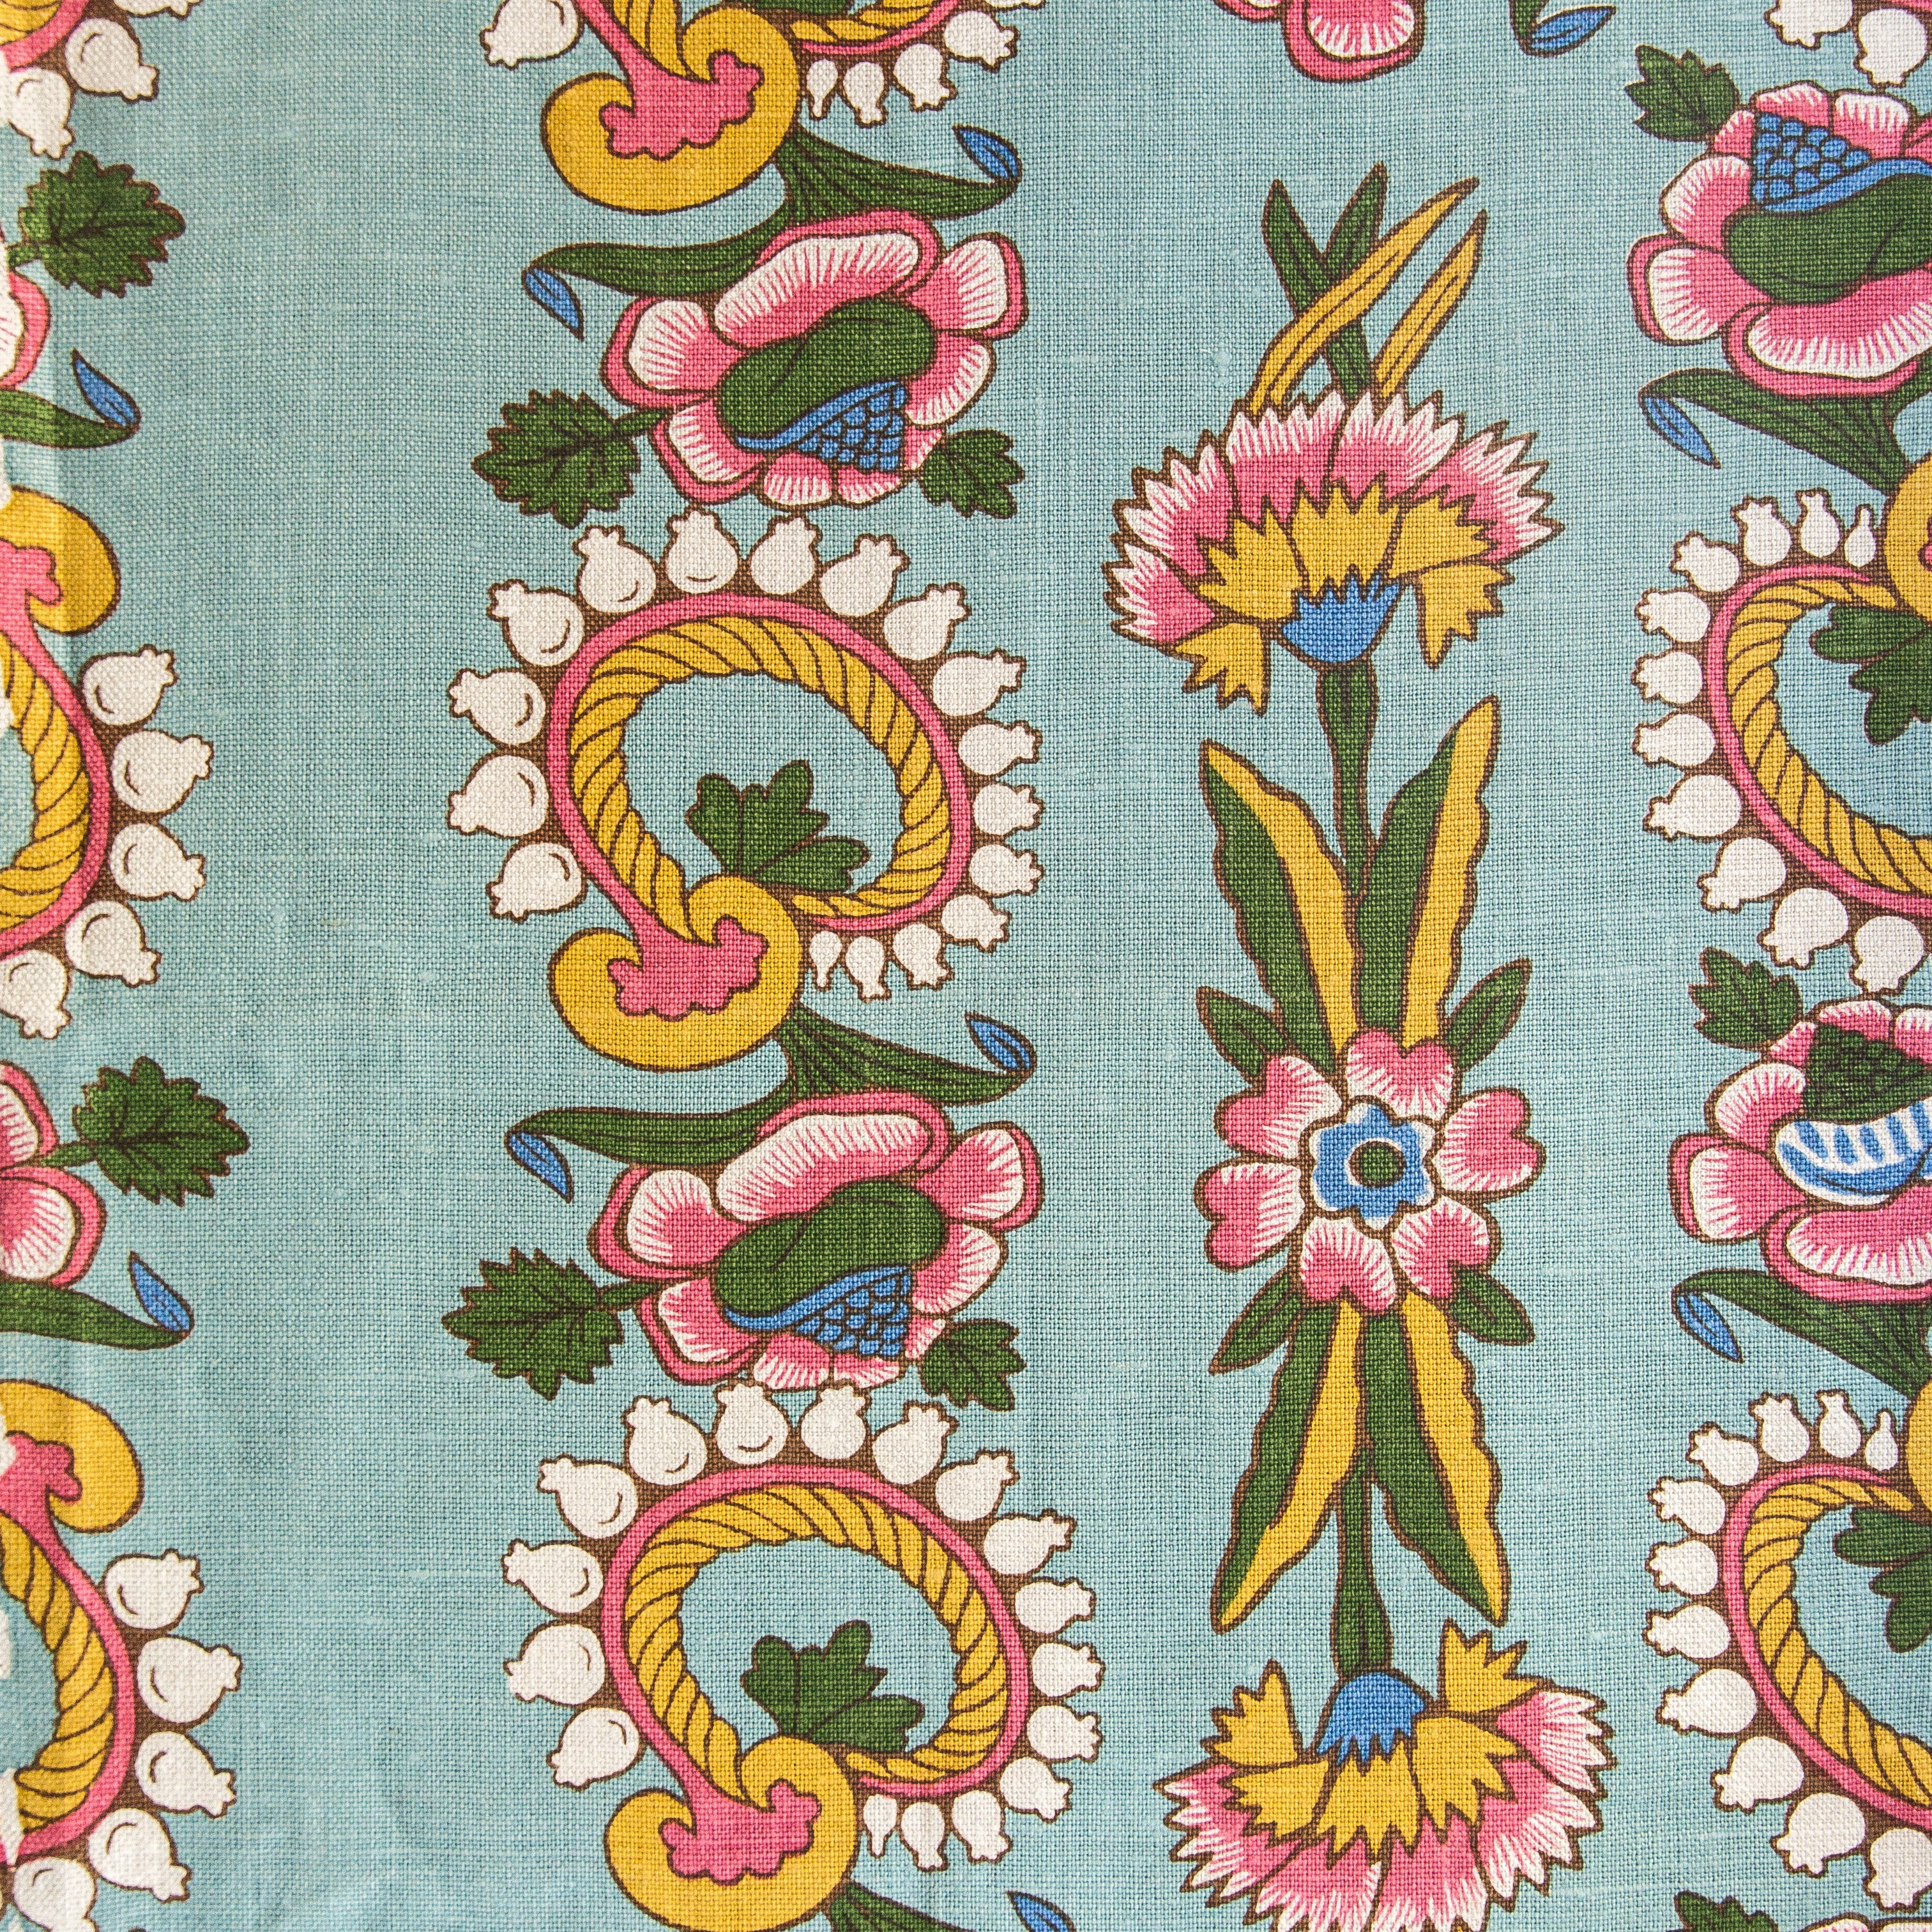 Detail of a hand-drawn floral pattern in yellow, green, pink and yellow on a turquoise ground.